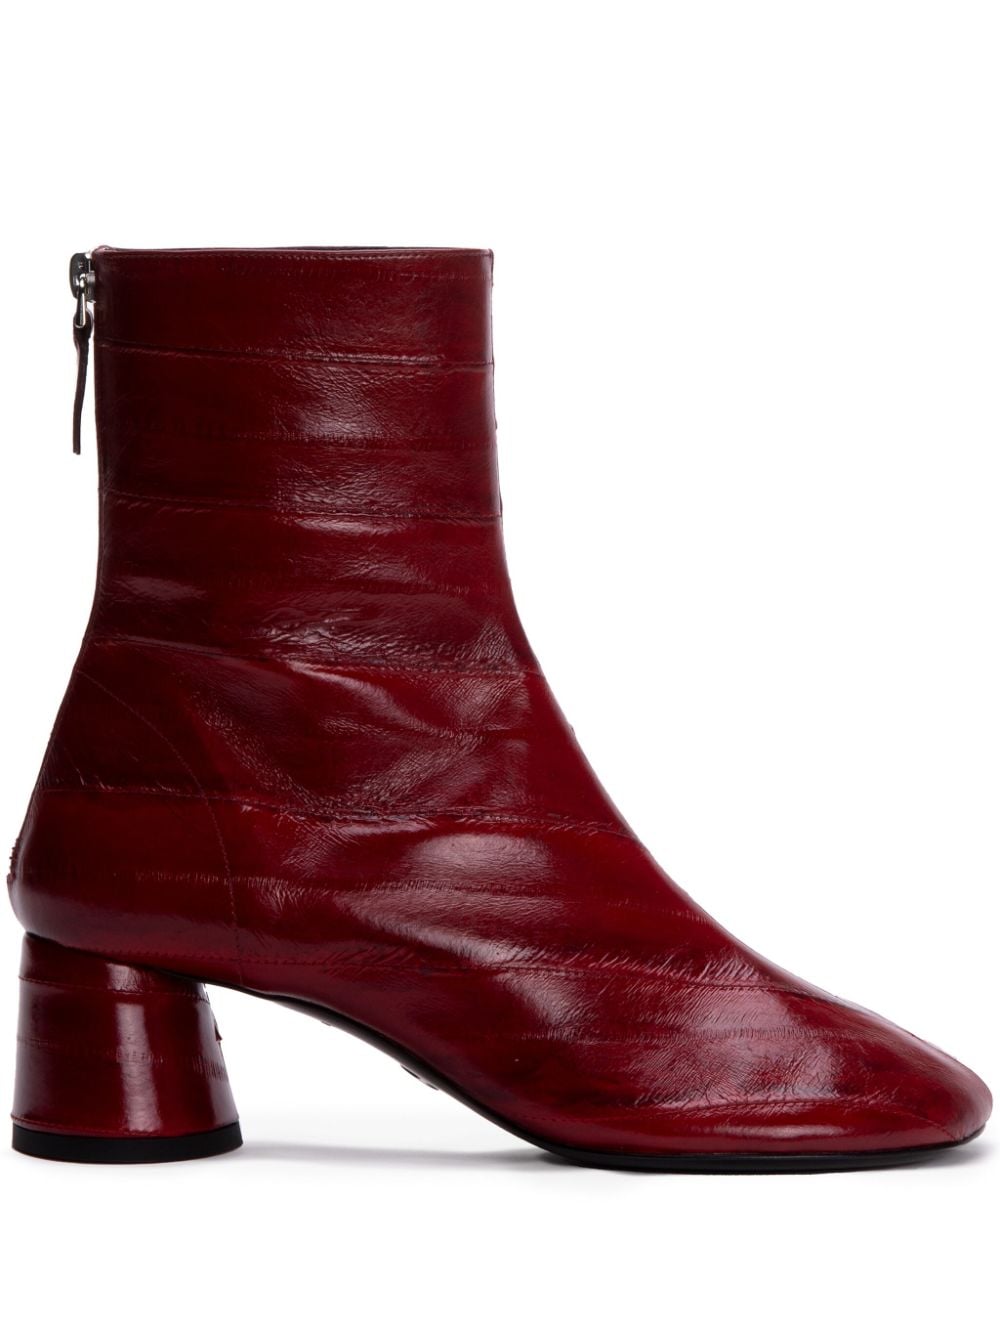 Proenza Schouler Glove Leather Boots In Red